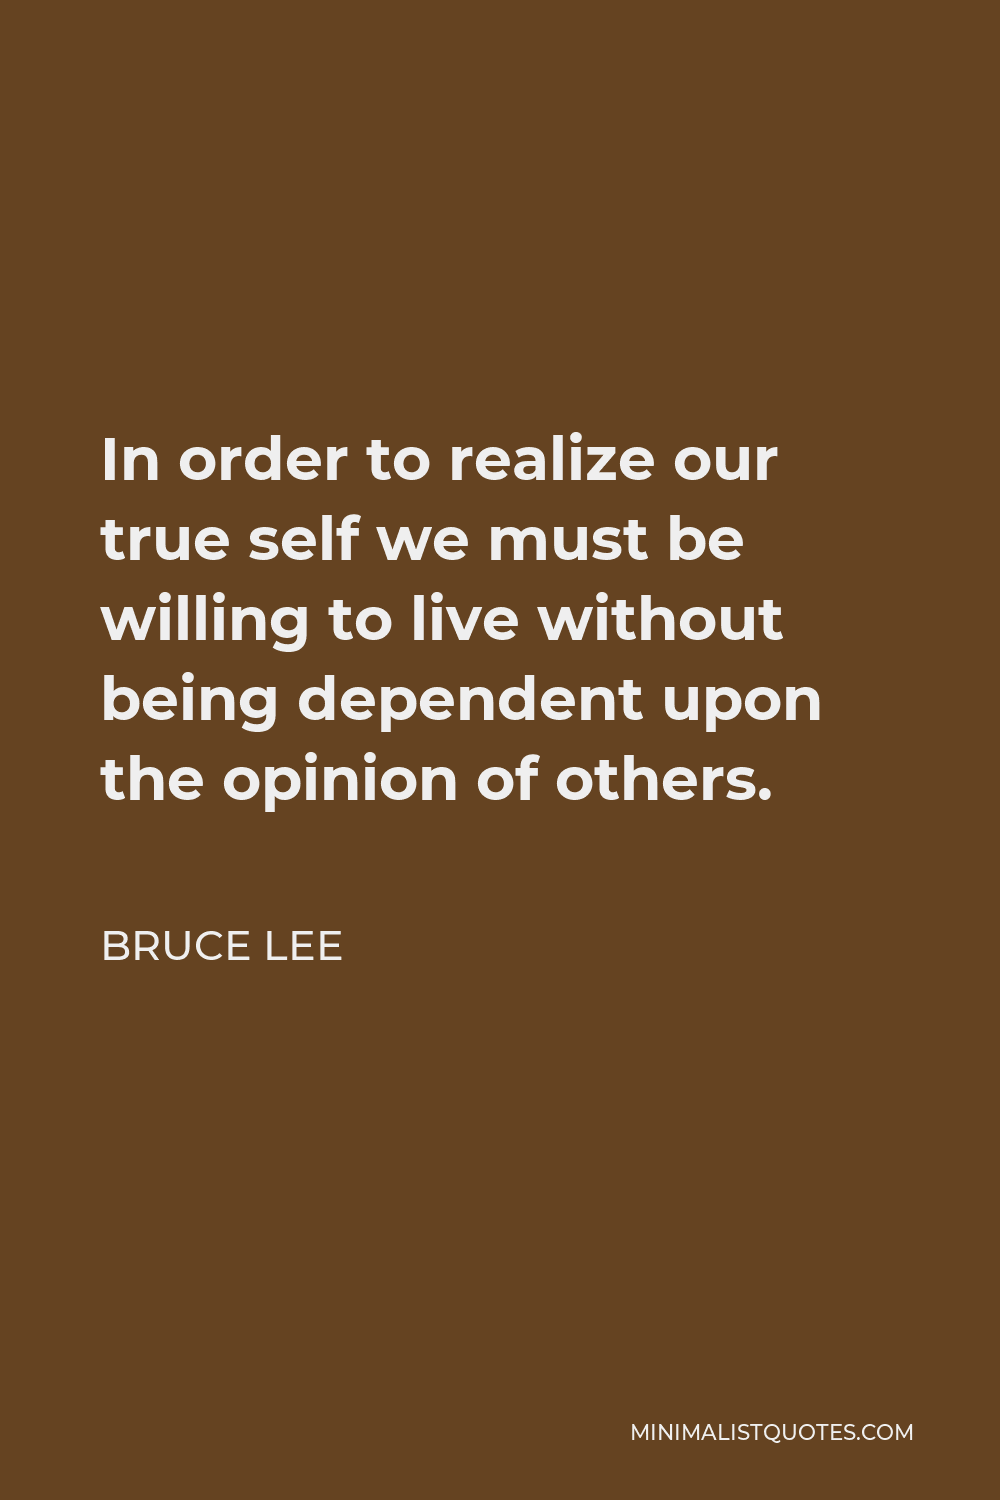 Bruce Lee Quote - In order to realize our true self we must be willing to live without being dependent upon the opinion of others.